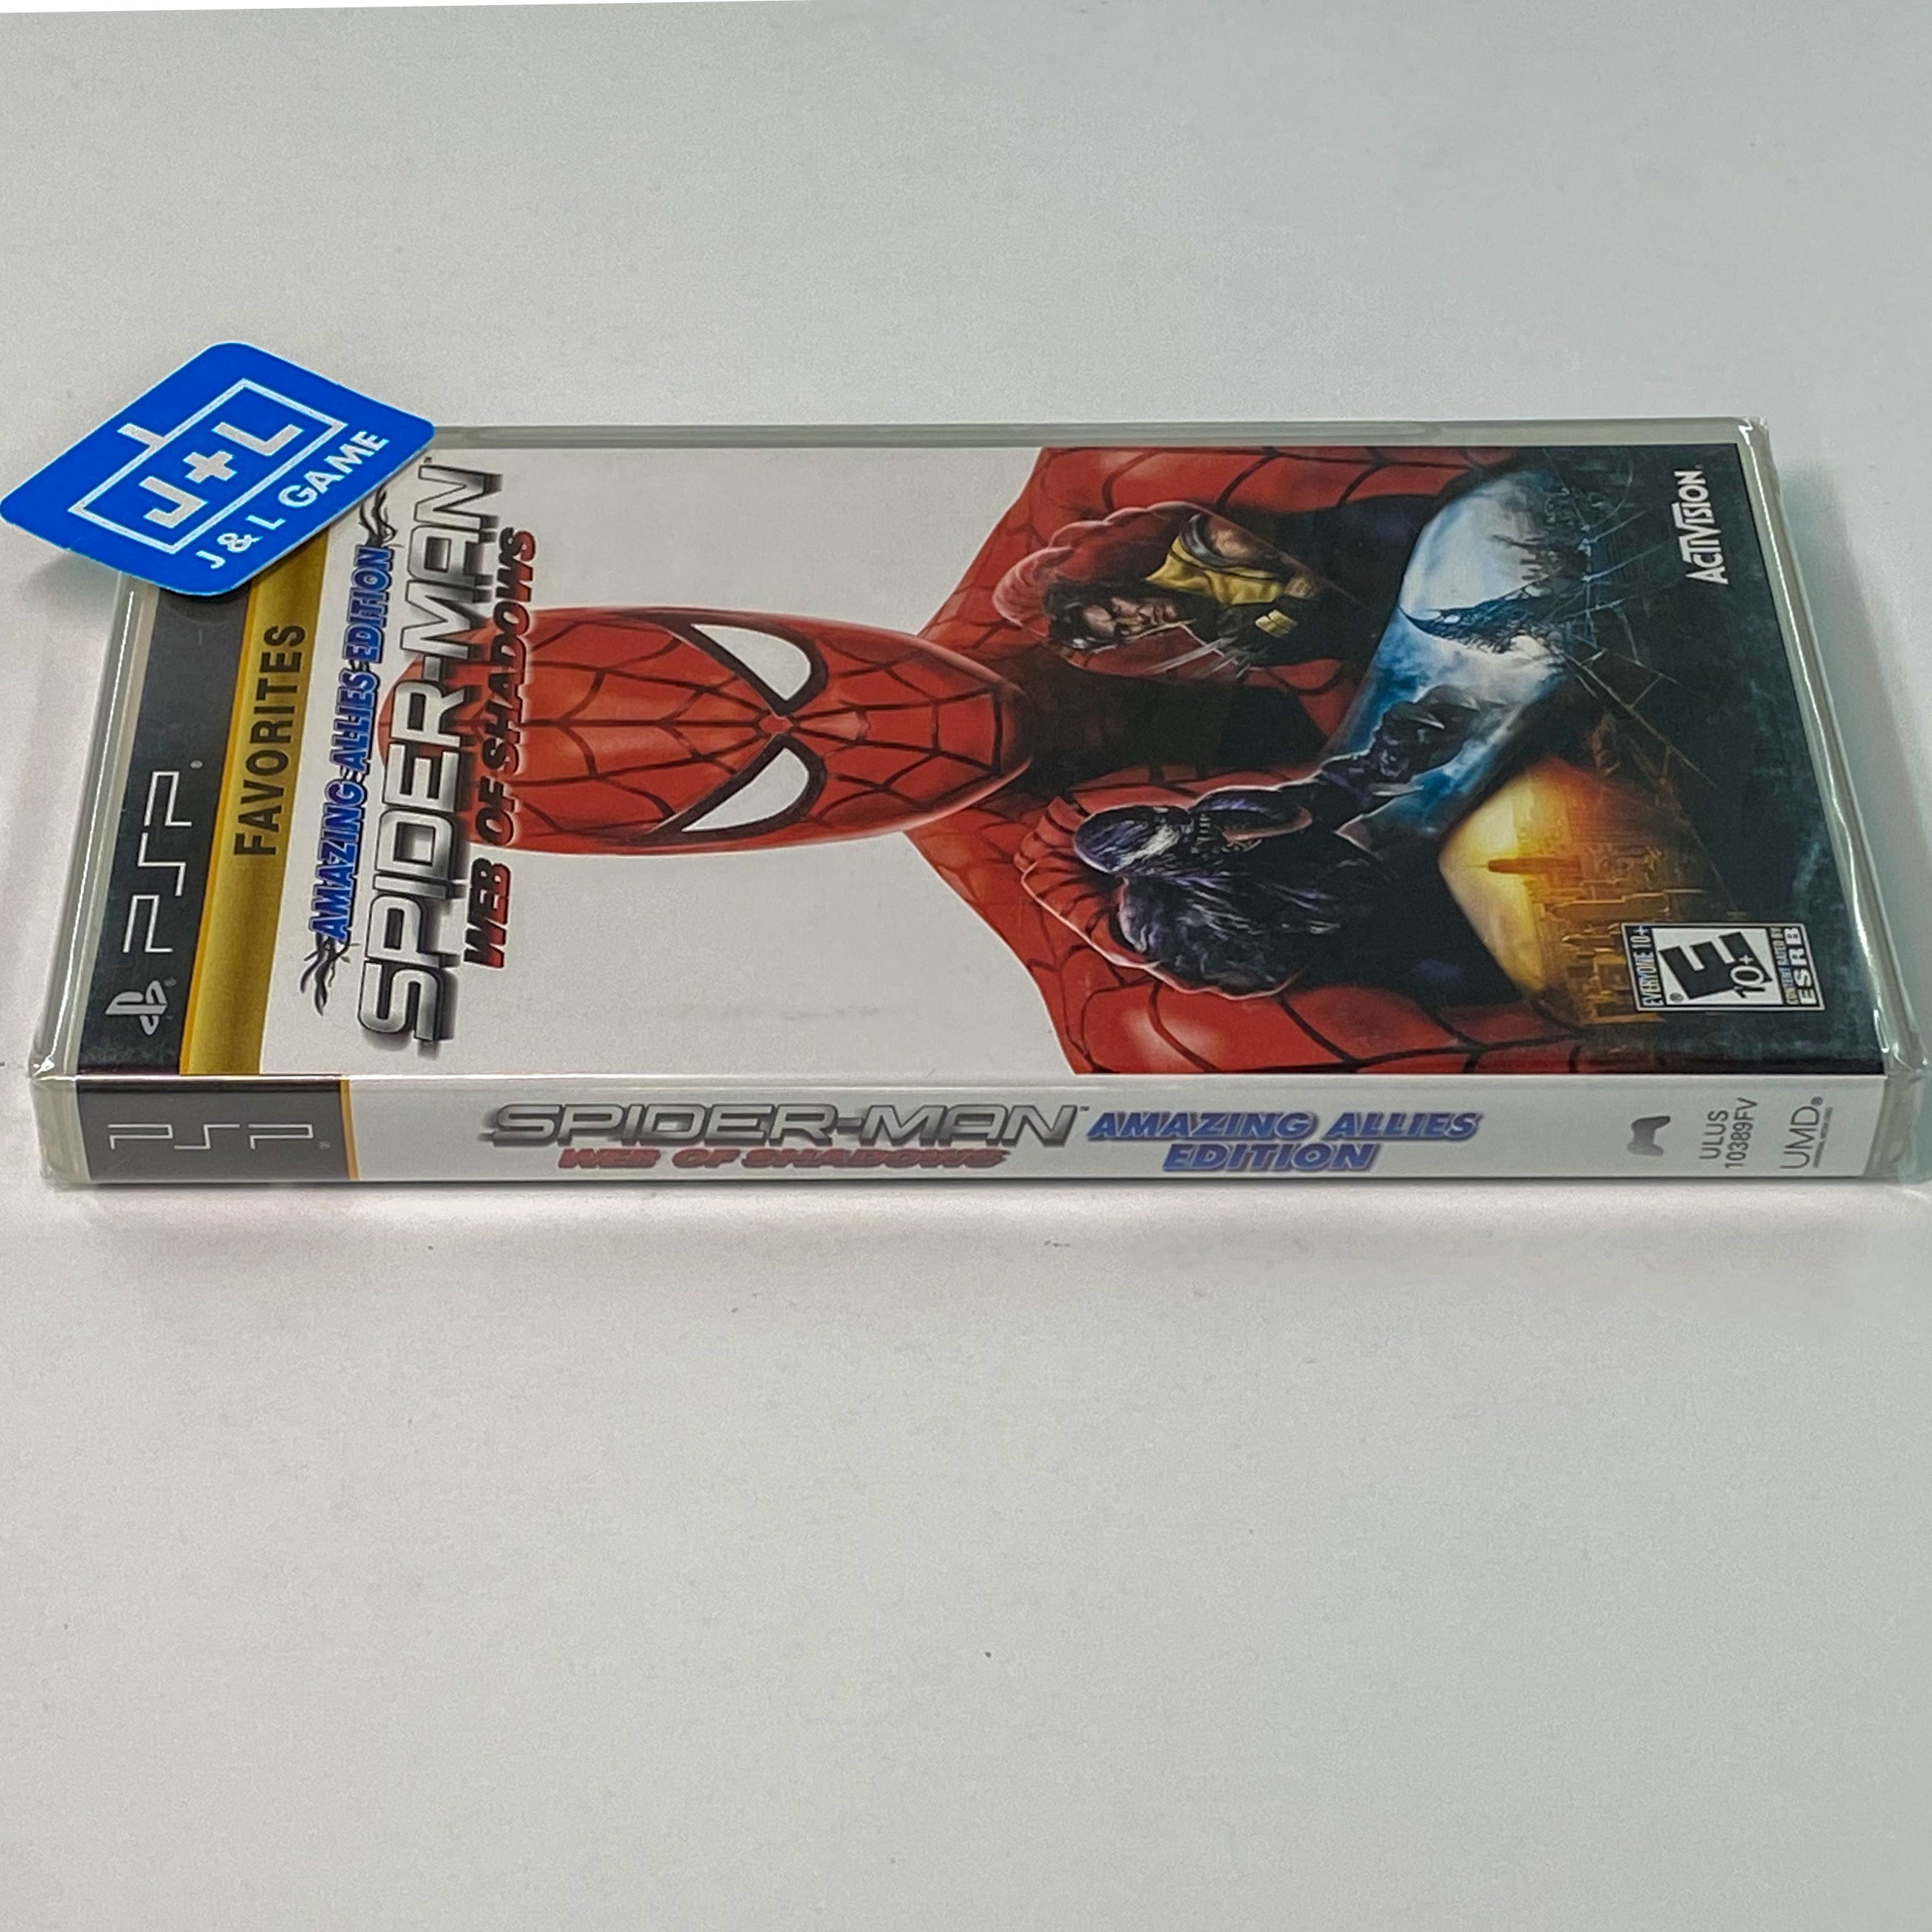 Spider-Man: Web of Shadows (Favorites) - Sony PSP Video Games ACTIVISION   